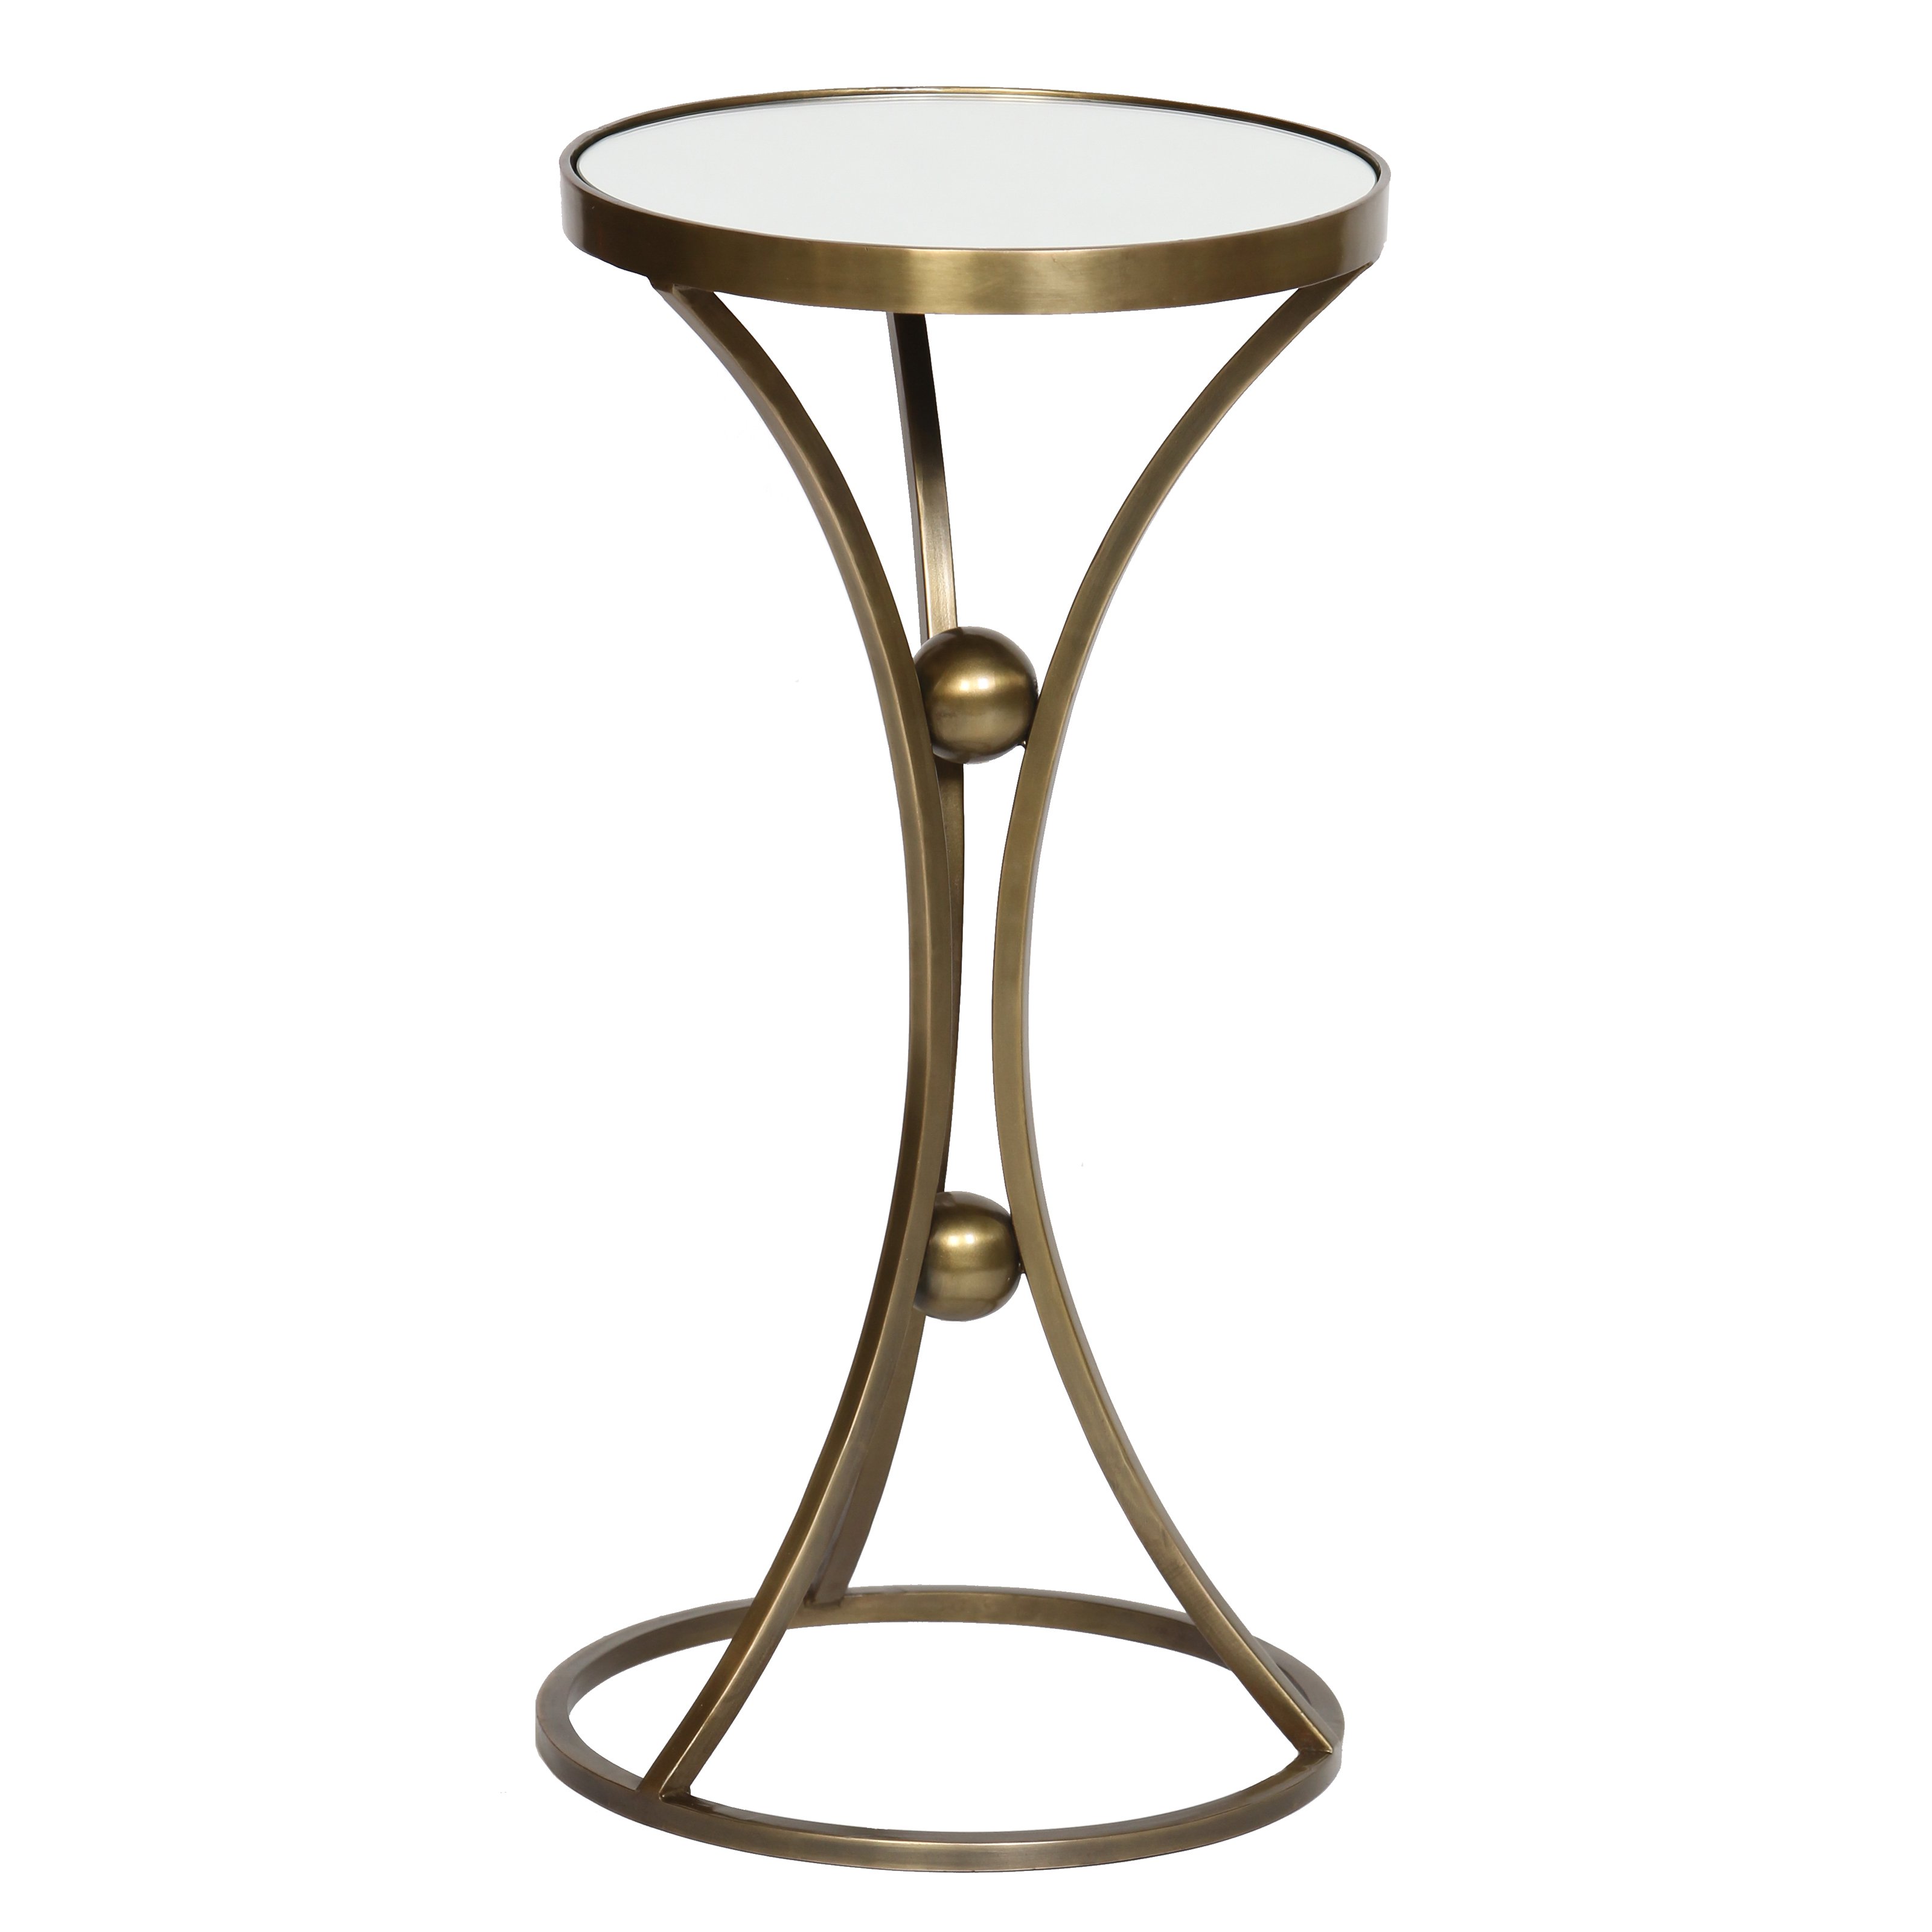 prima legged accent table antique brass transitional style end tables small rectangular board game coffee wood pedestal base cigar humidor cabinet play farm dining room sets glass